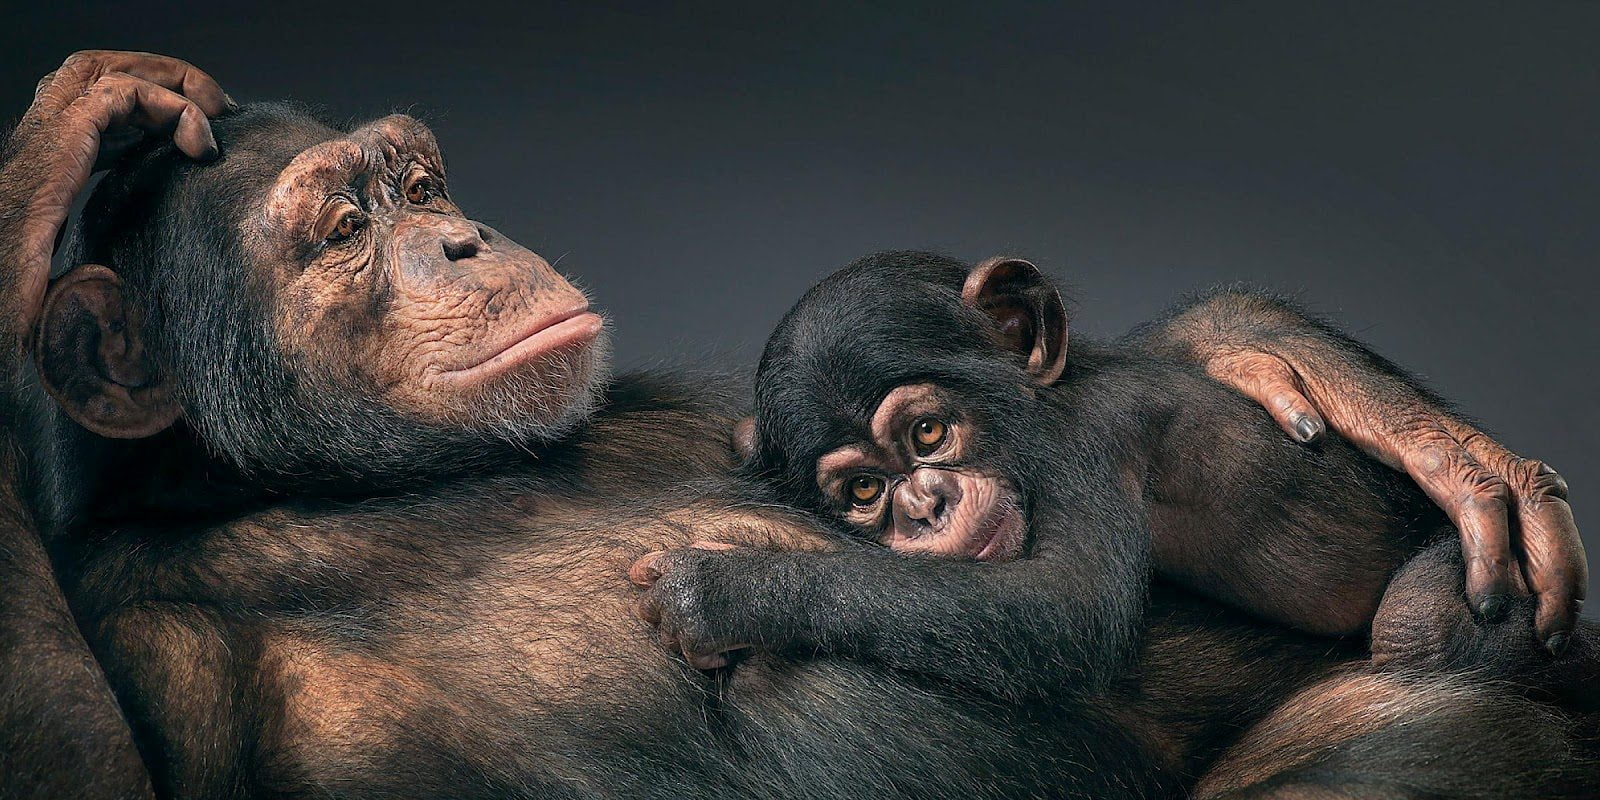 tim-flach-more-than-human-animal-portraits-chimpanzee-mother-and-child